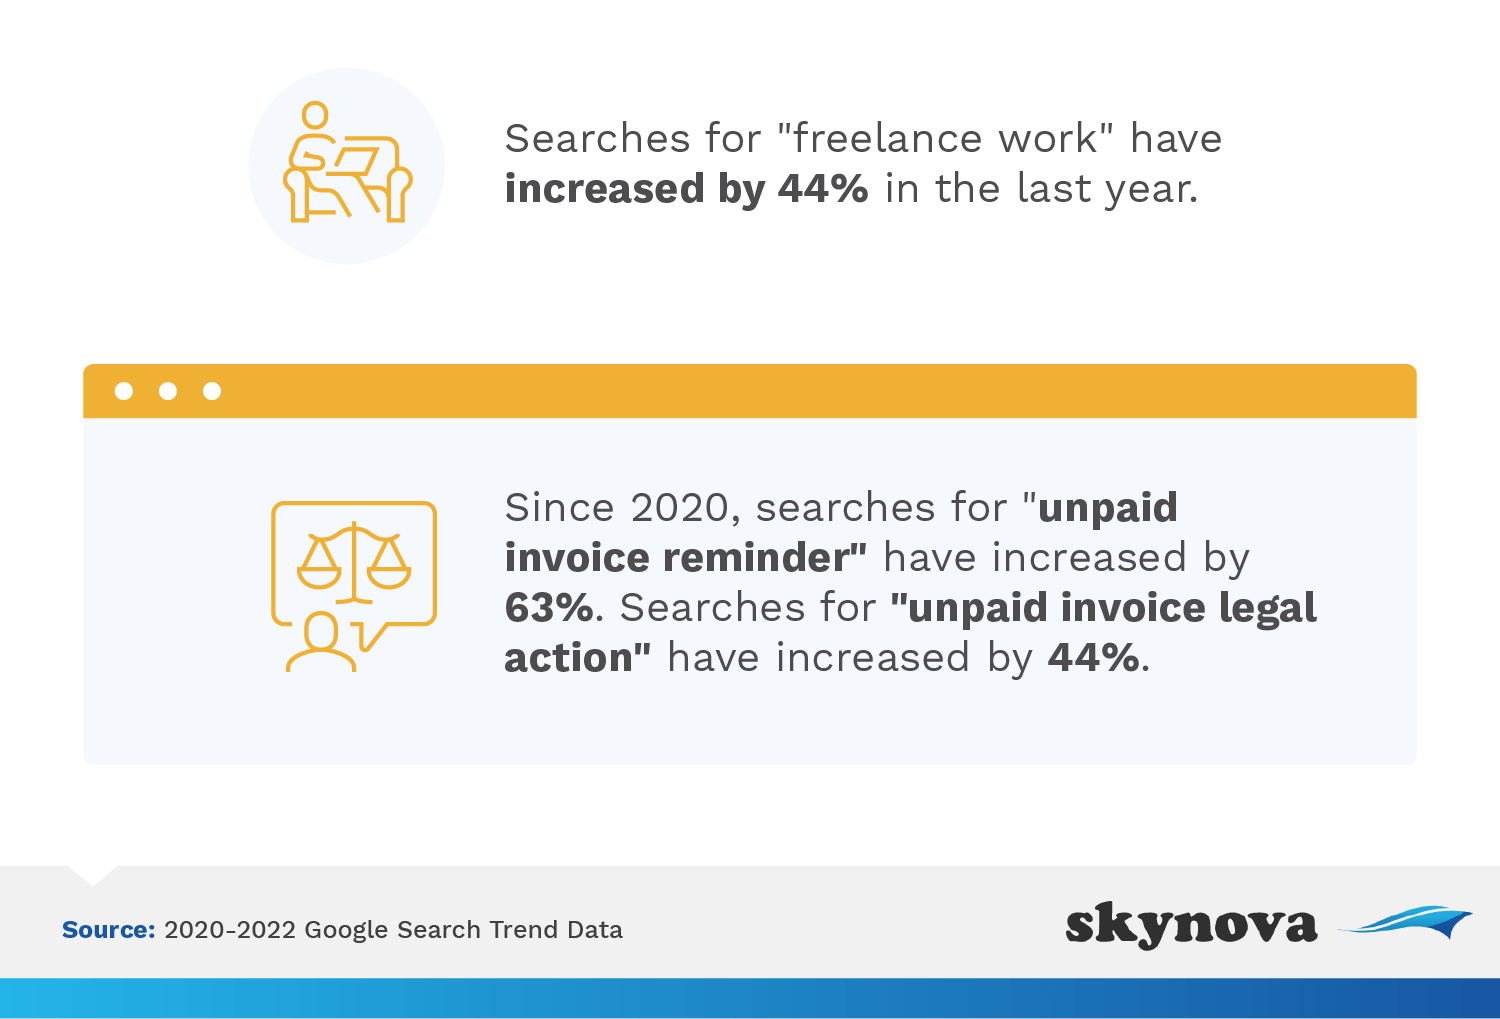 Searches for freelance work have increased 44% in the last year